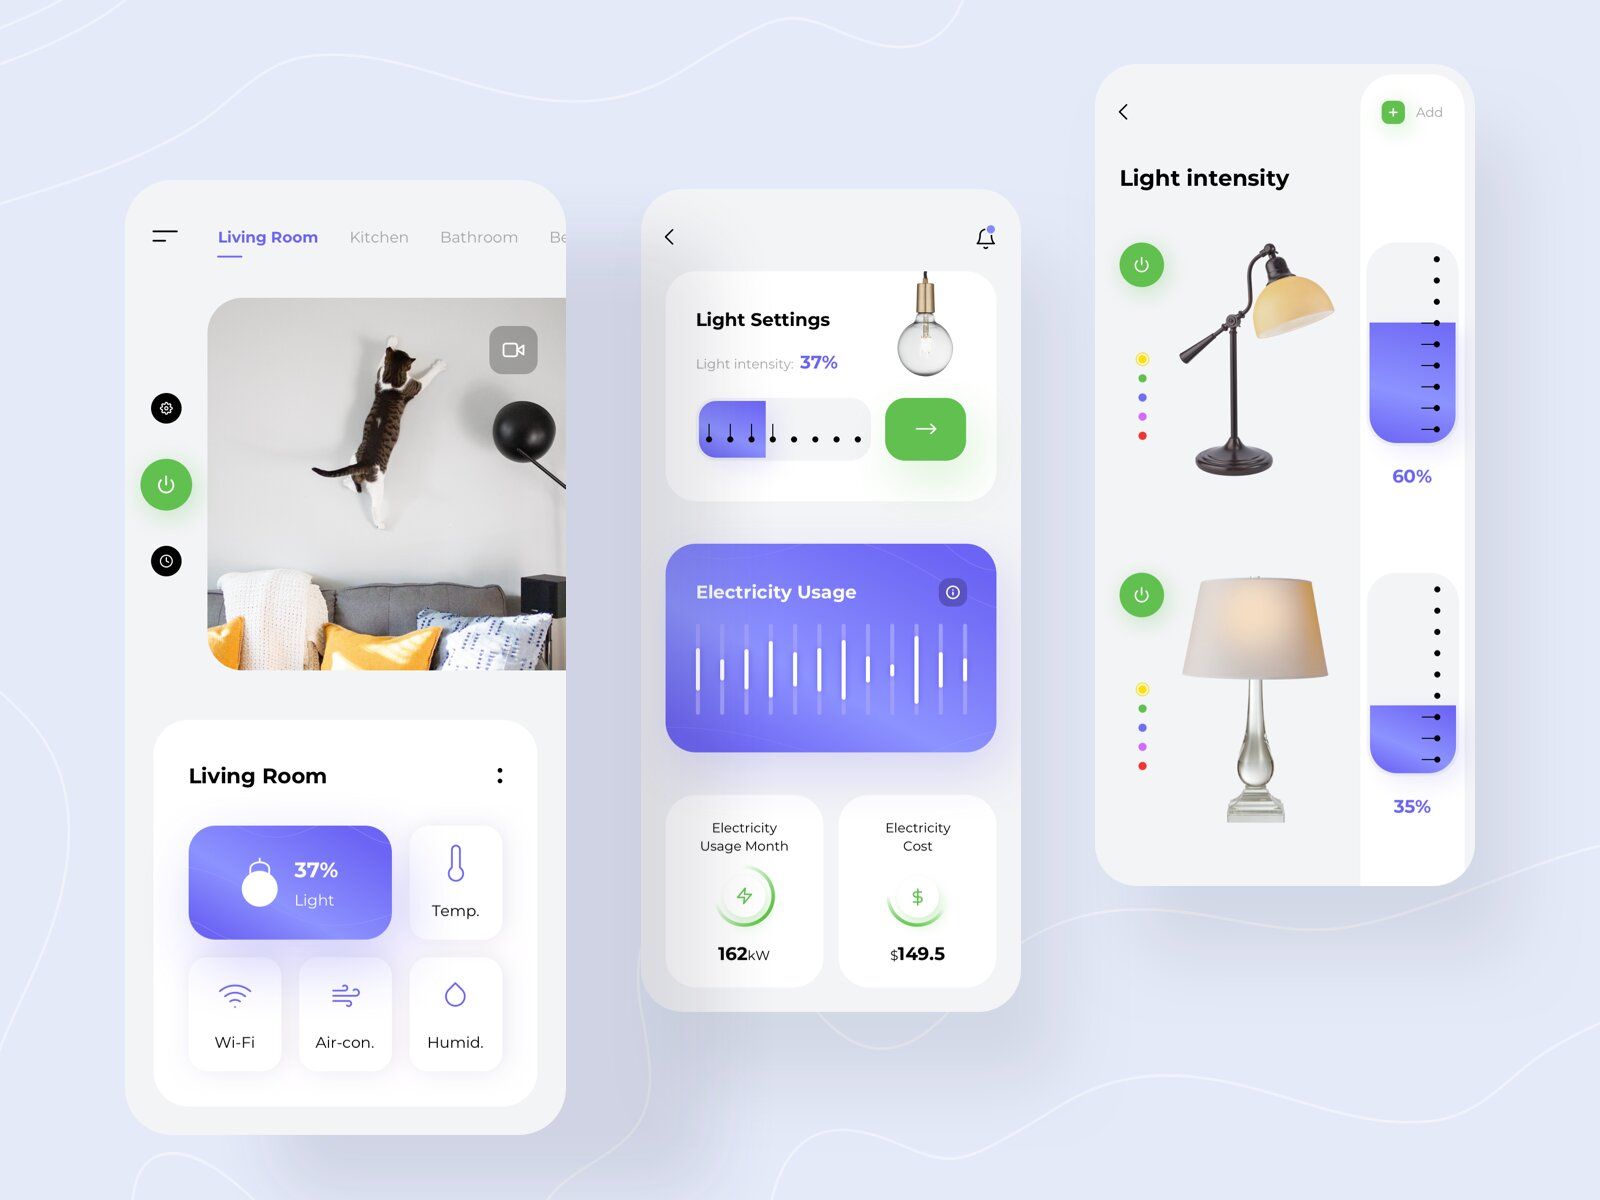 Smart home automation app is a great way to control IoT devices in a smart house (*image by [Nadya Lazurenko](https://dribbble.com/NadyaLazurenko){ rel="nofollow" target="_blank" .default-md}*)